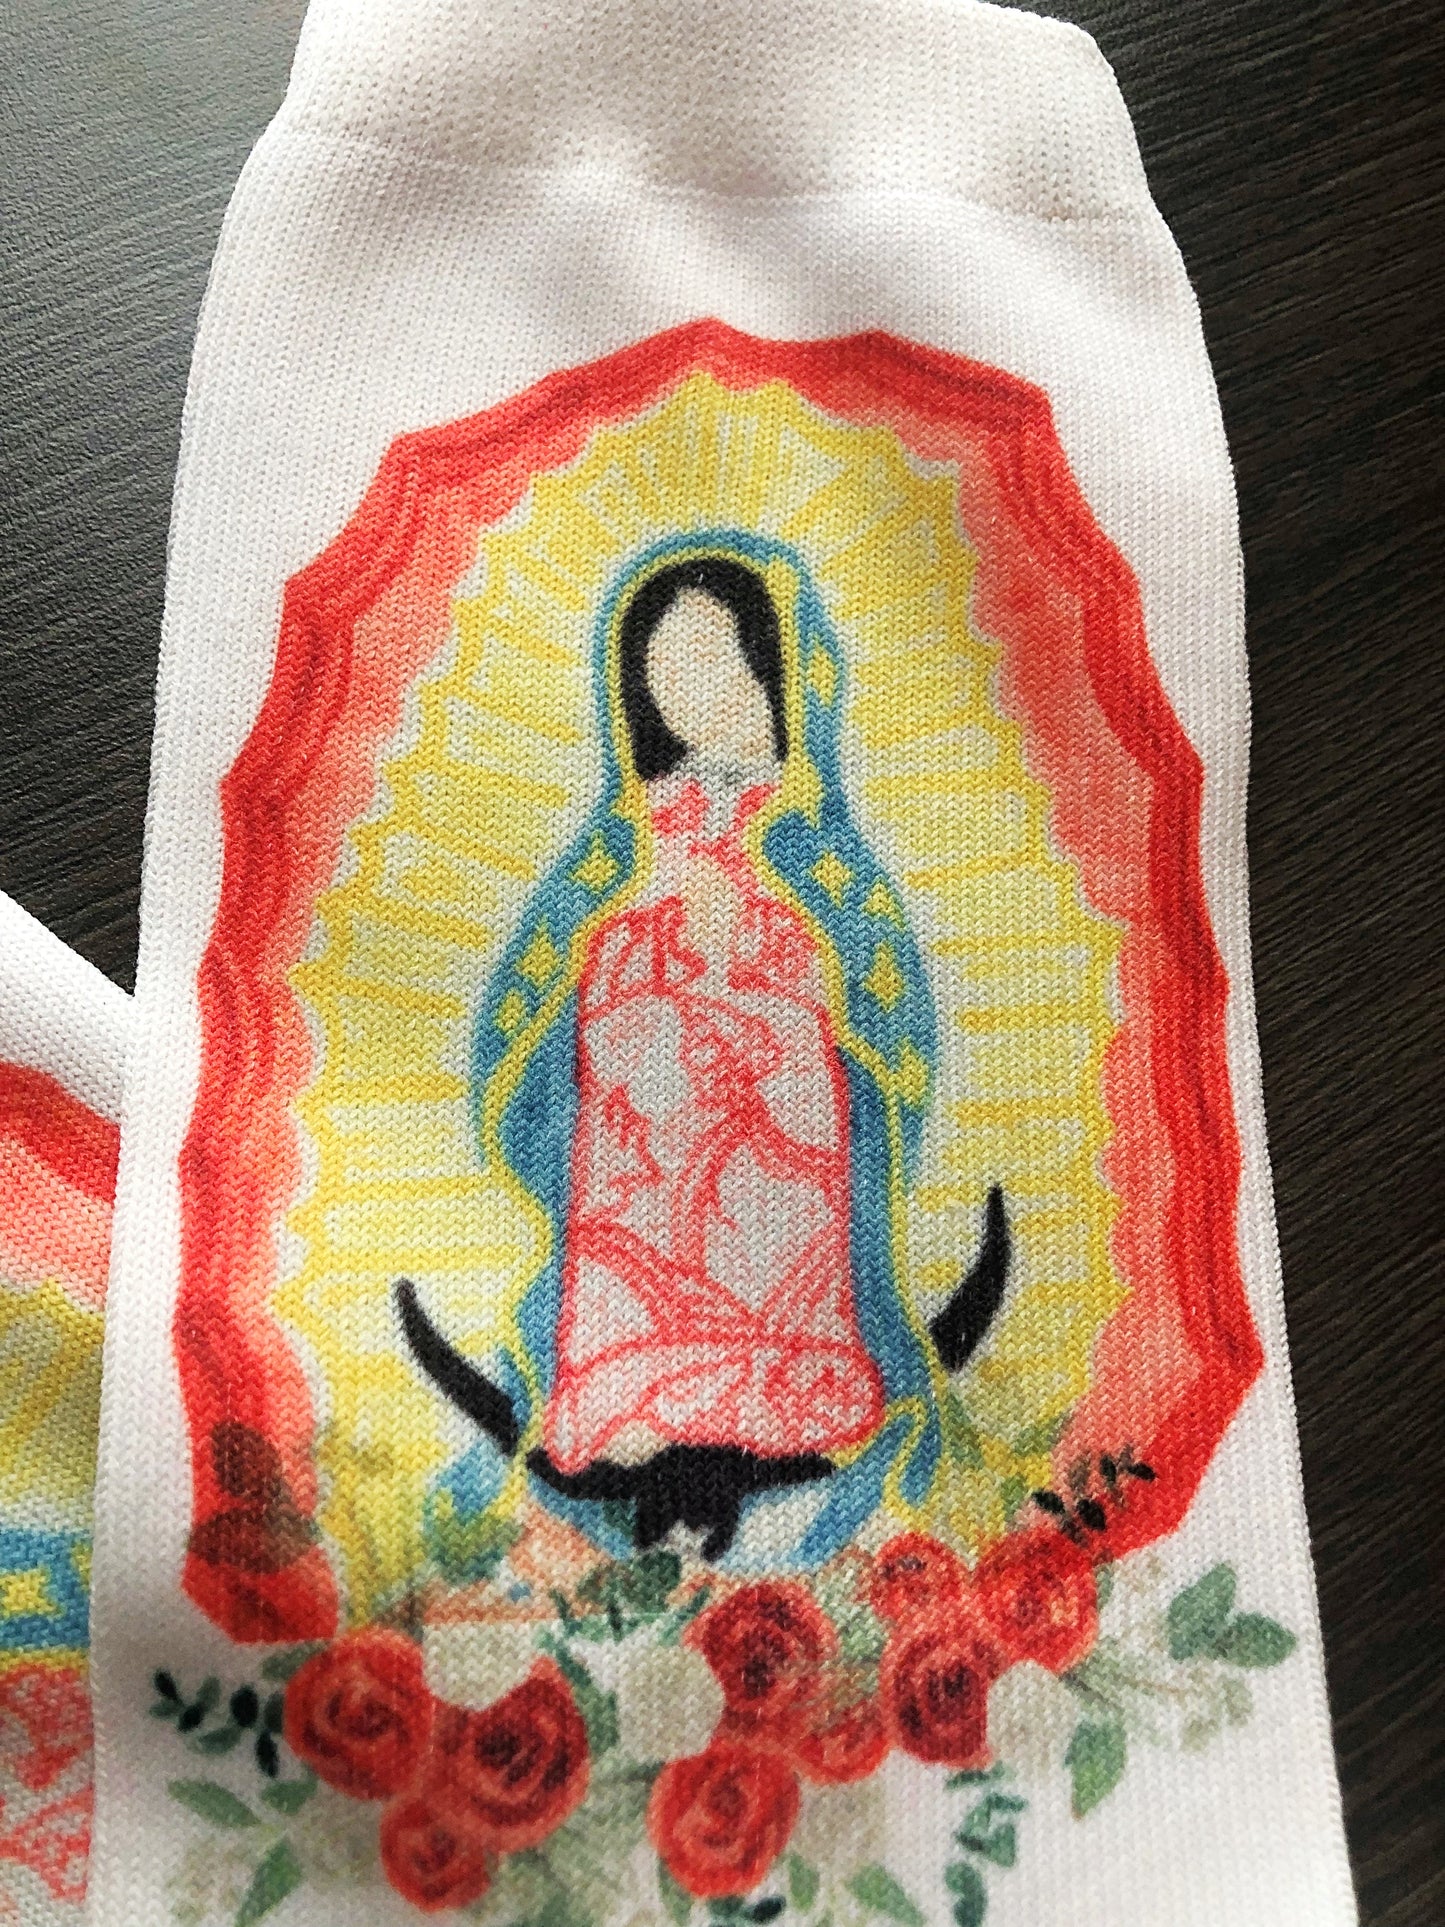 Our Lady of Guadalupe Socks - Catholic Valentine Gift for her